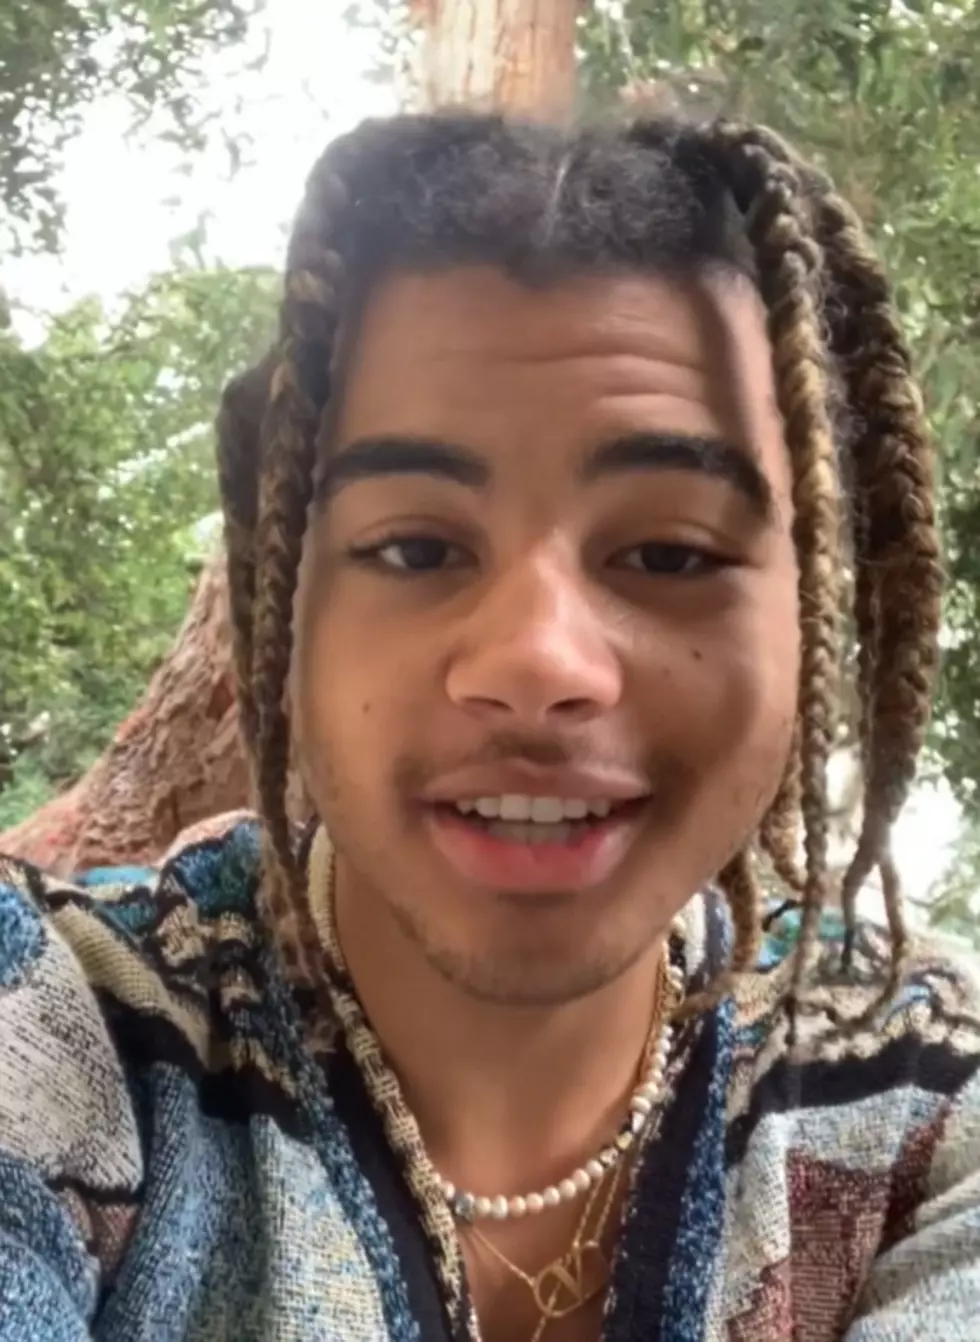 VIDEO: 24kGoldn Wants You To Register To Vote